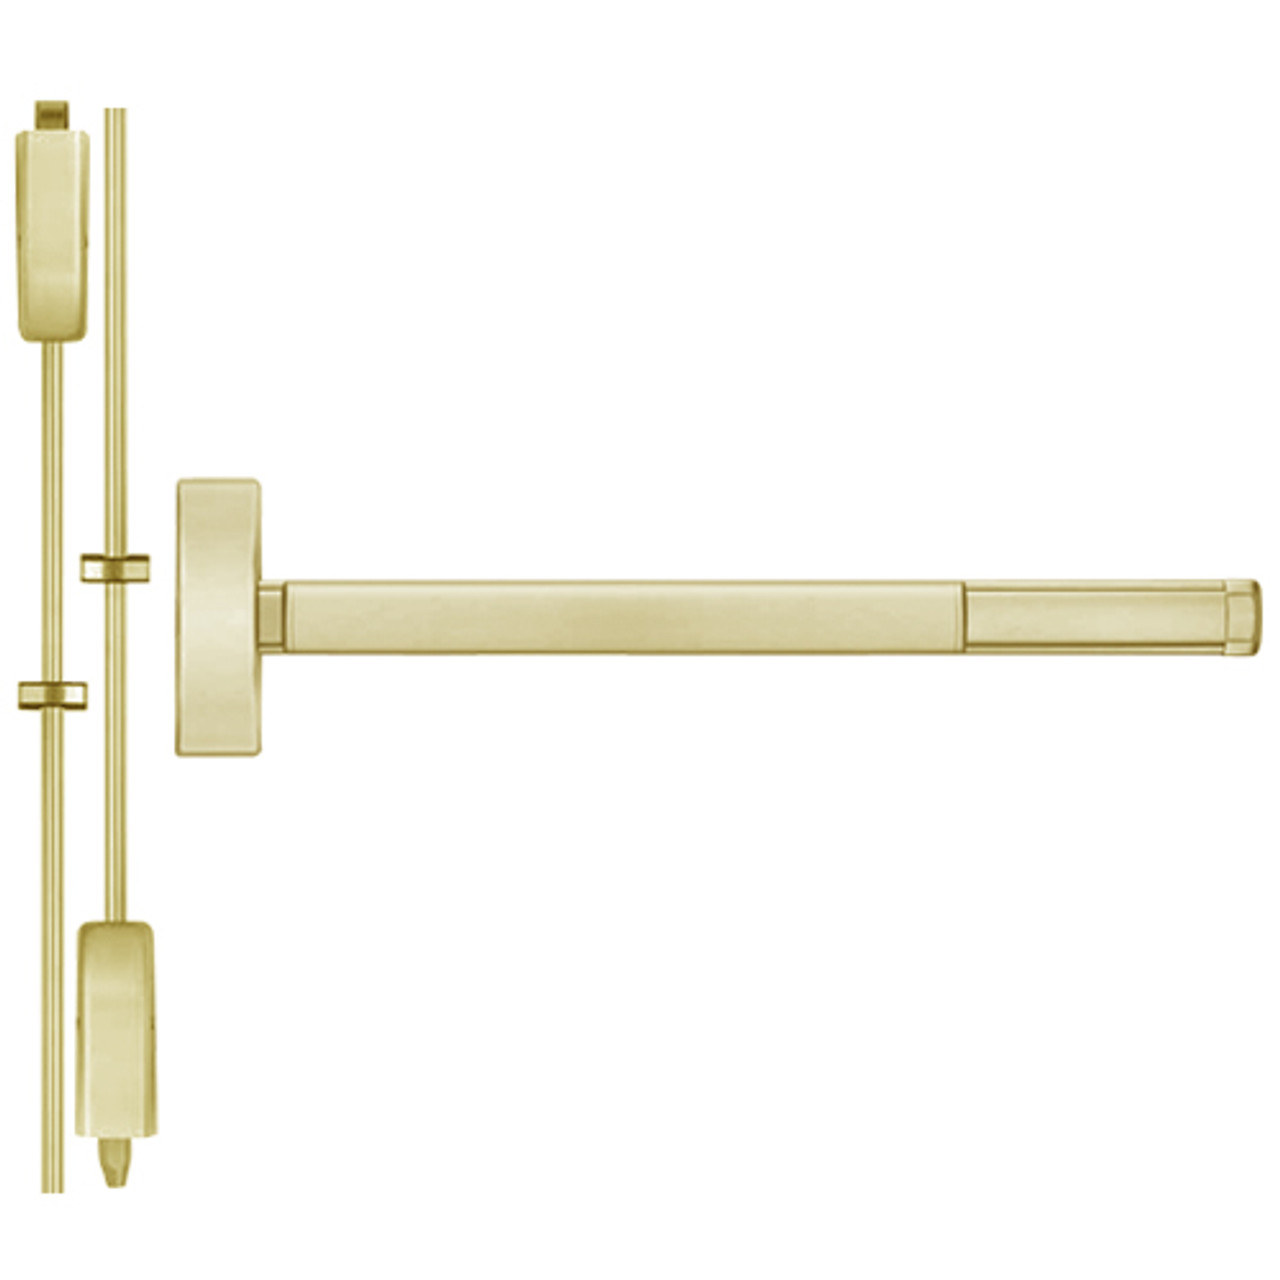 ELR2208-606-36 PHI 2200 Series Non Fire Rated Apex Surface Vertical Rod Device with Electric Latch Retraction Prepped for Key Controls Lever/Knob in Satin Brass Finish